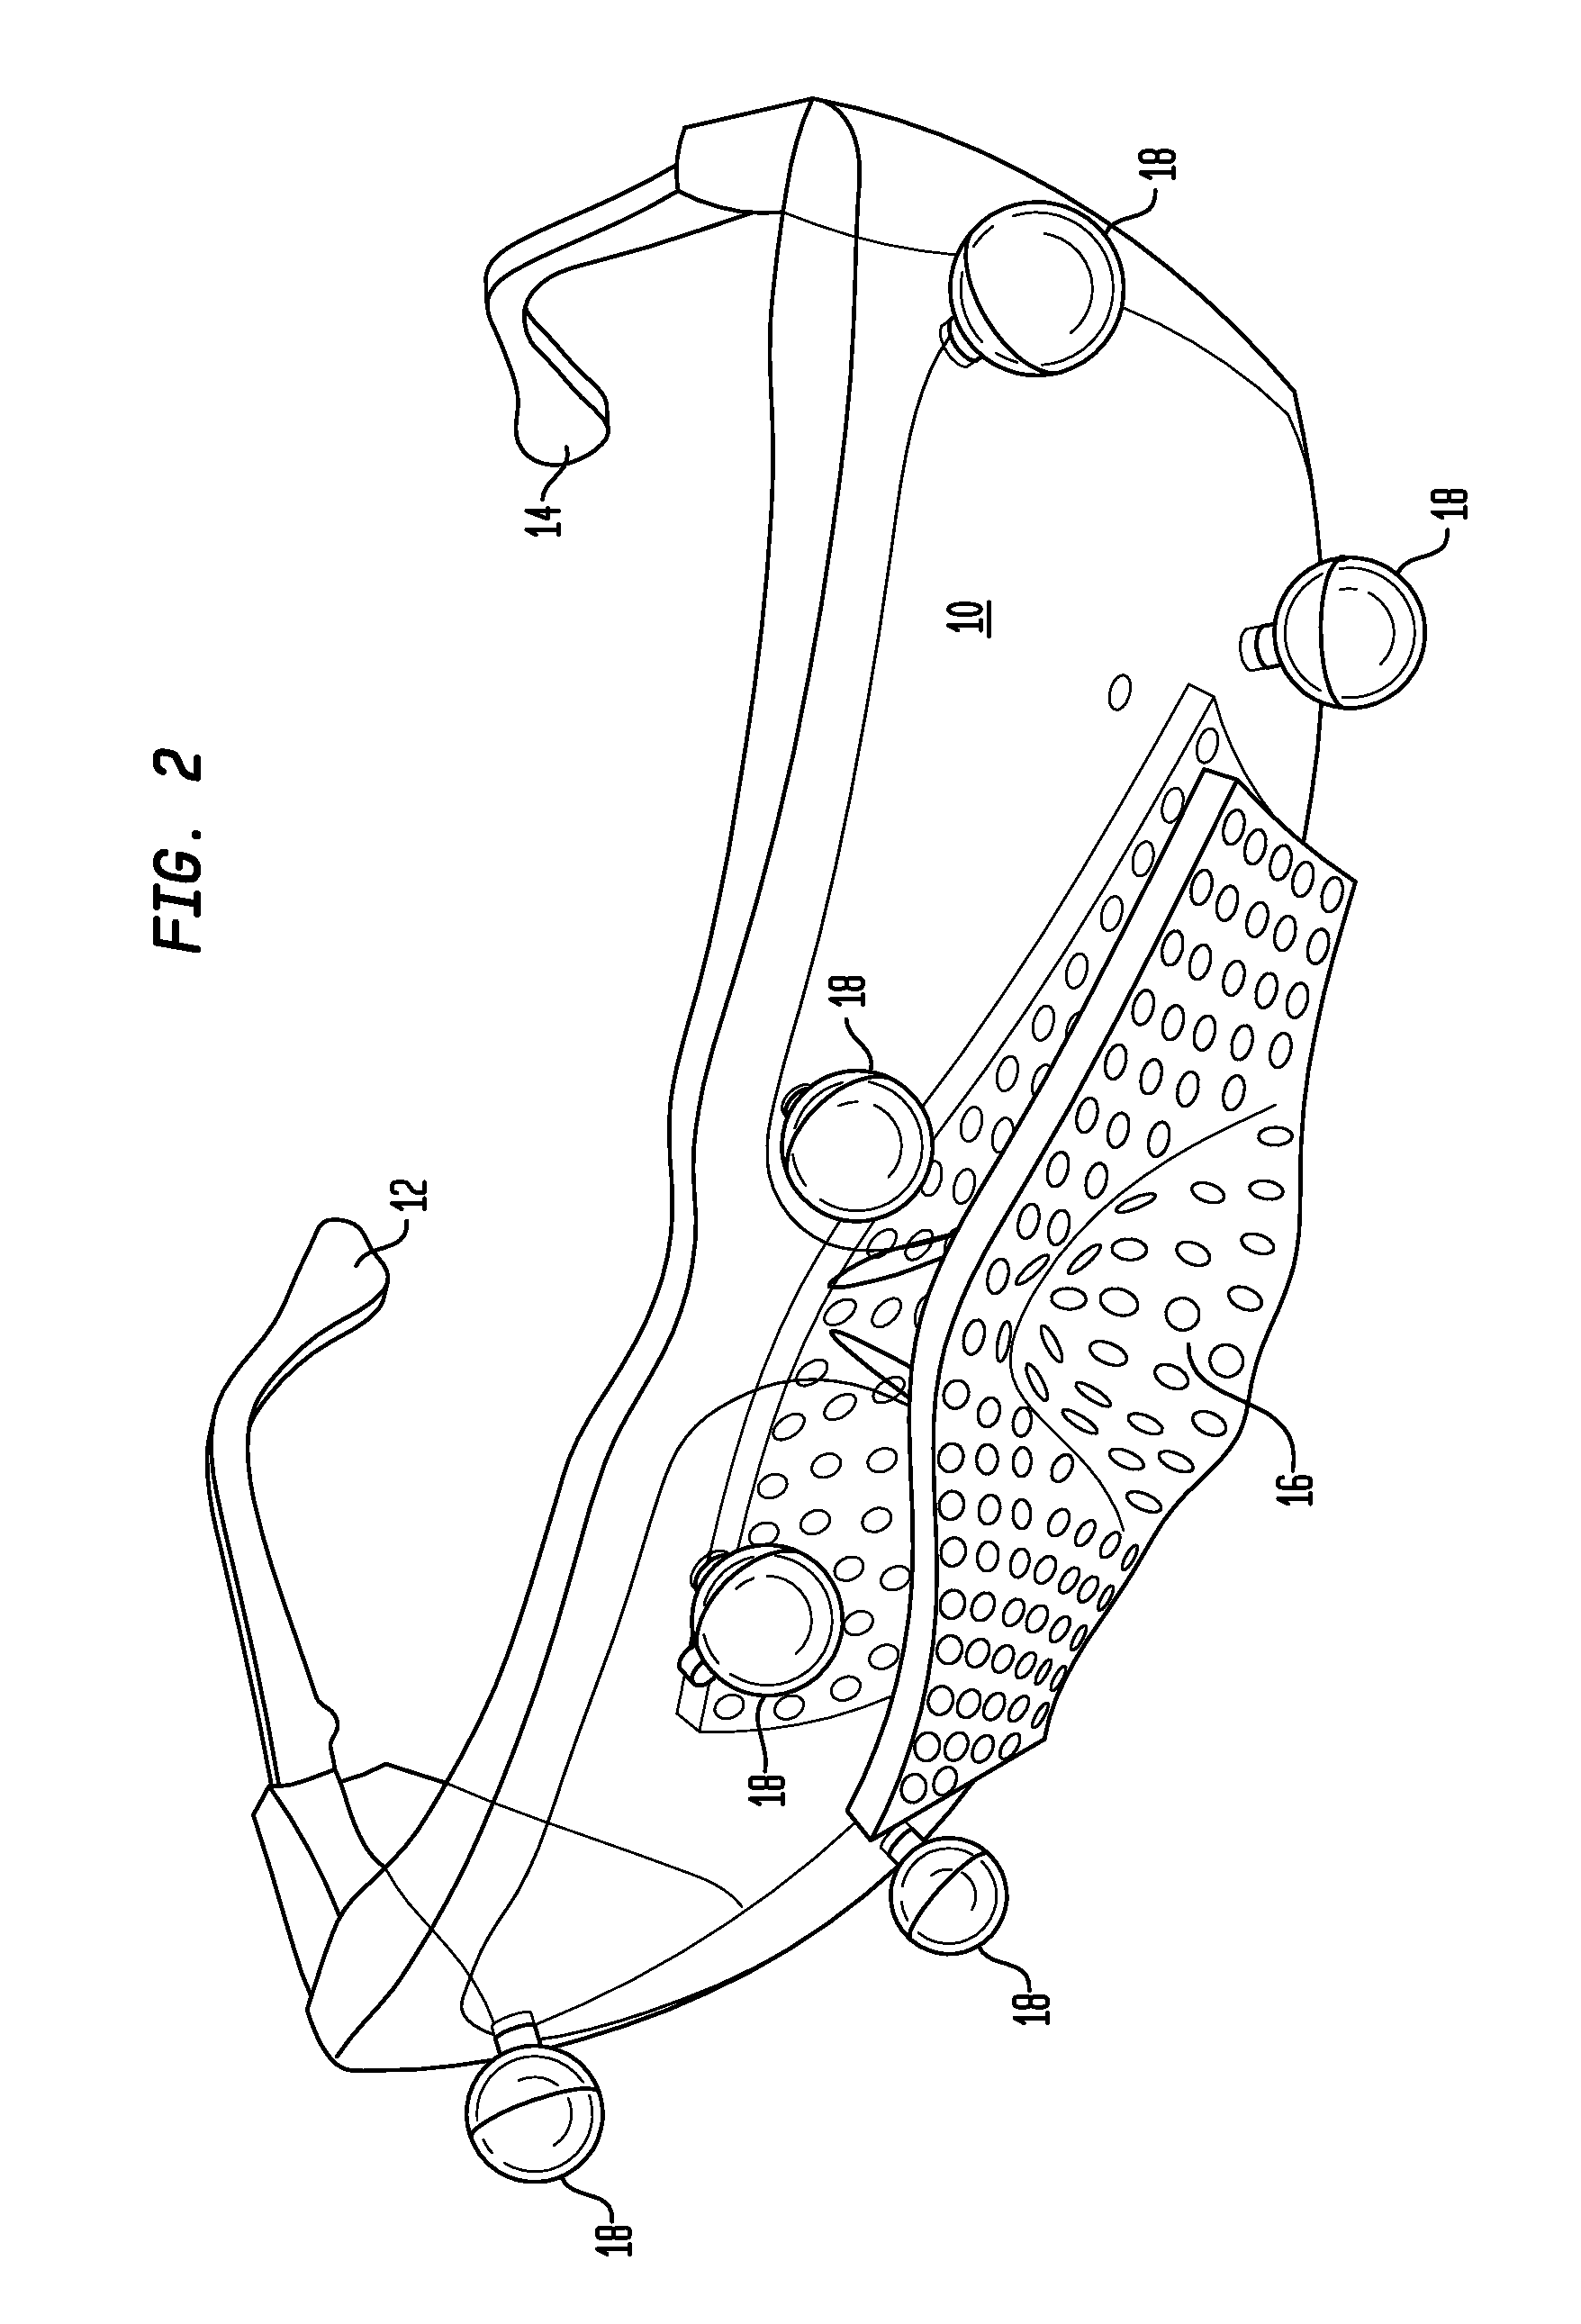 Cranial alignment device for use in intracranial stereotactic surgery